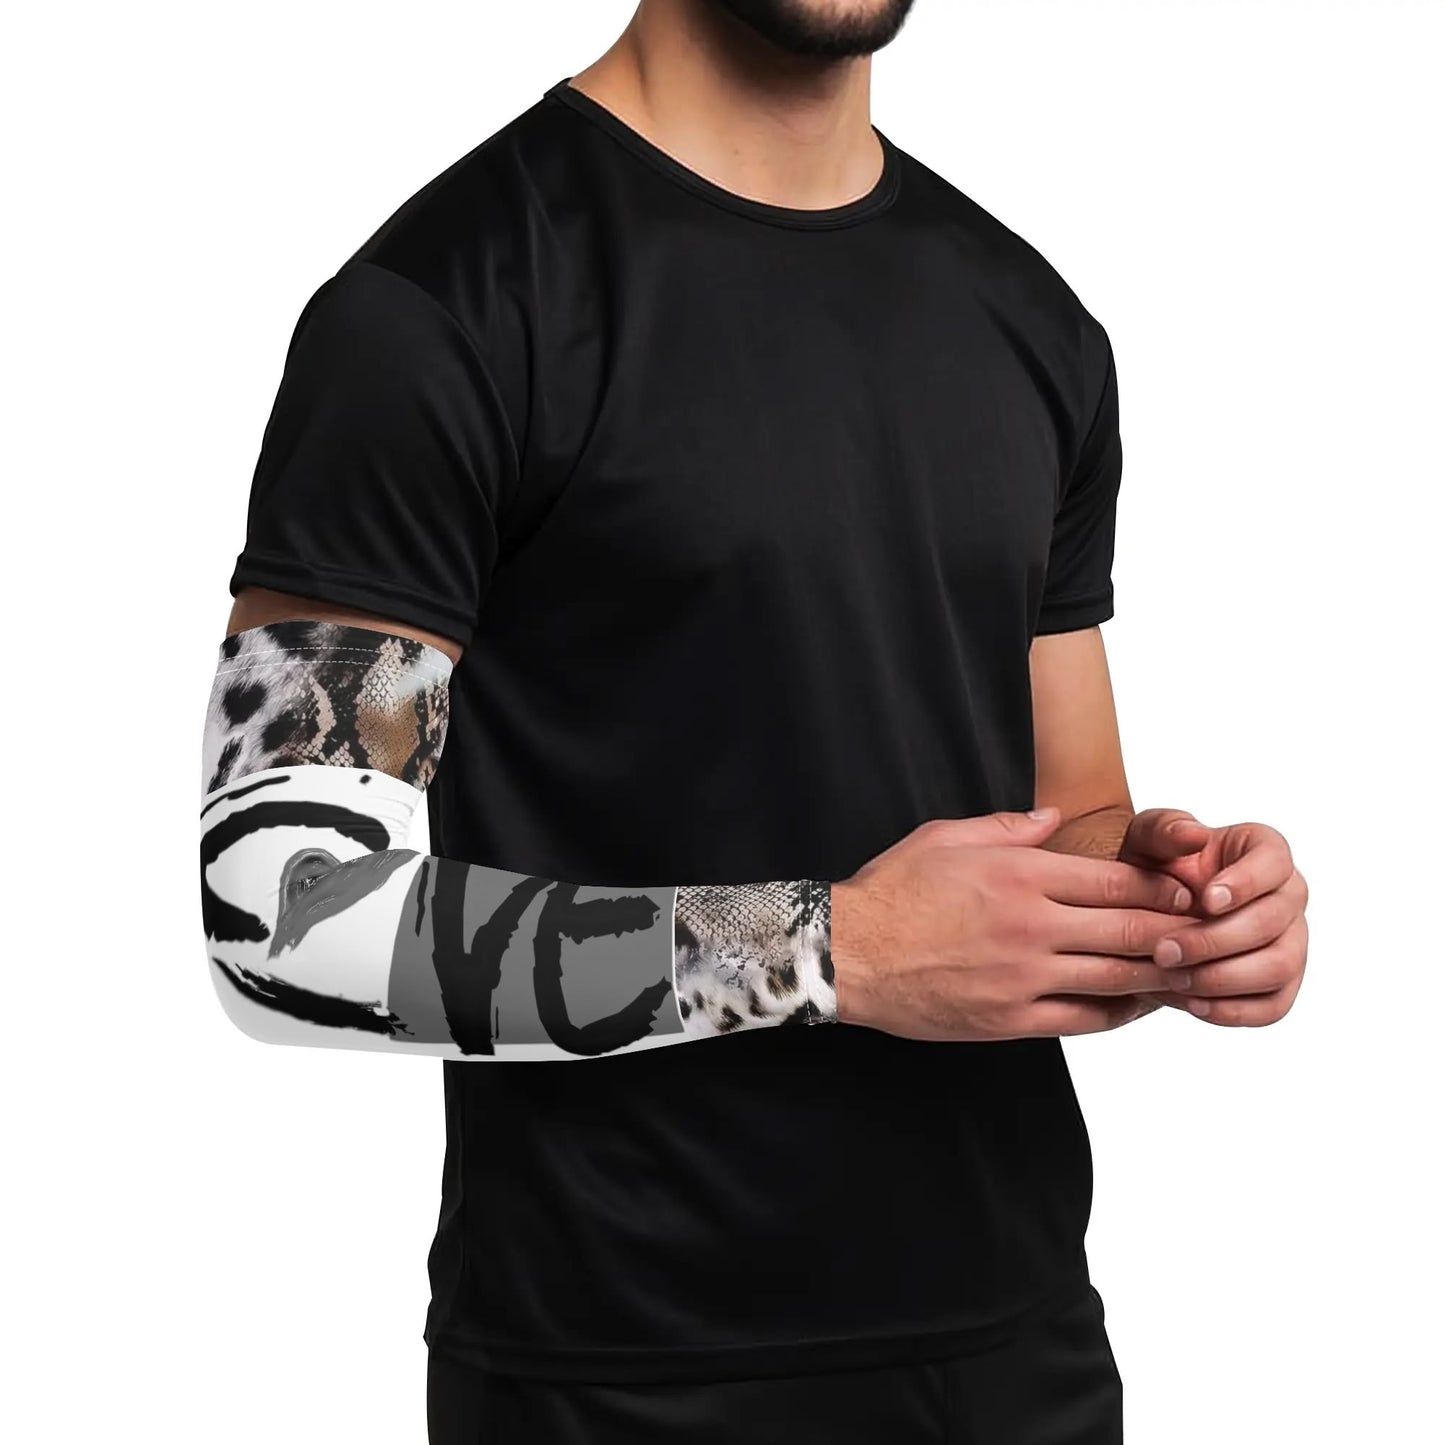 Sean Breed Love Cooling Arm Sleeves Arm Cover for UV Sun Protection